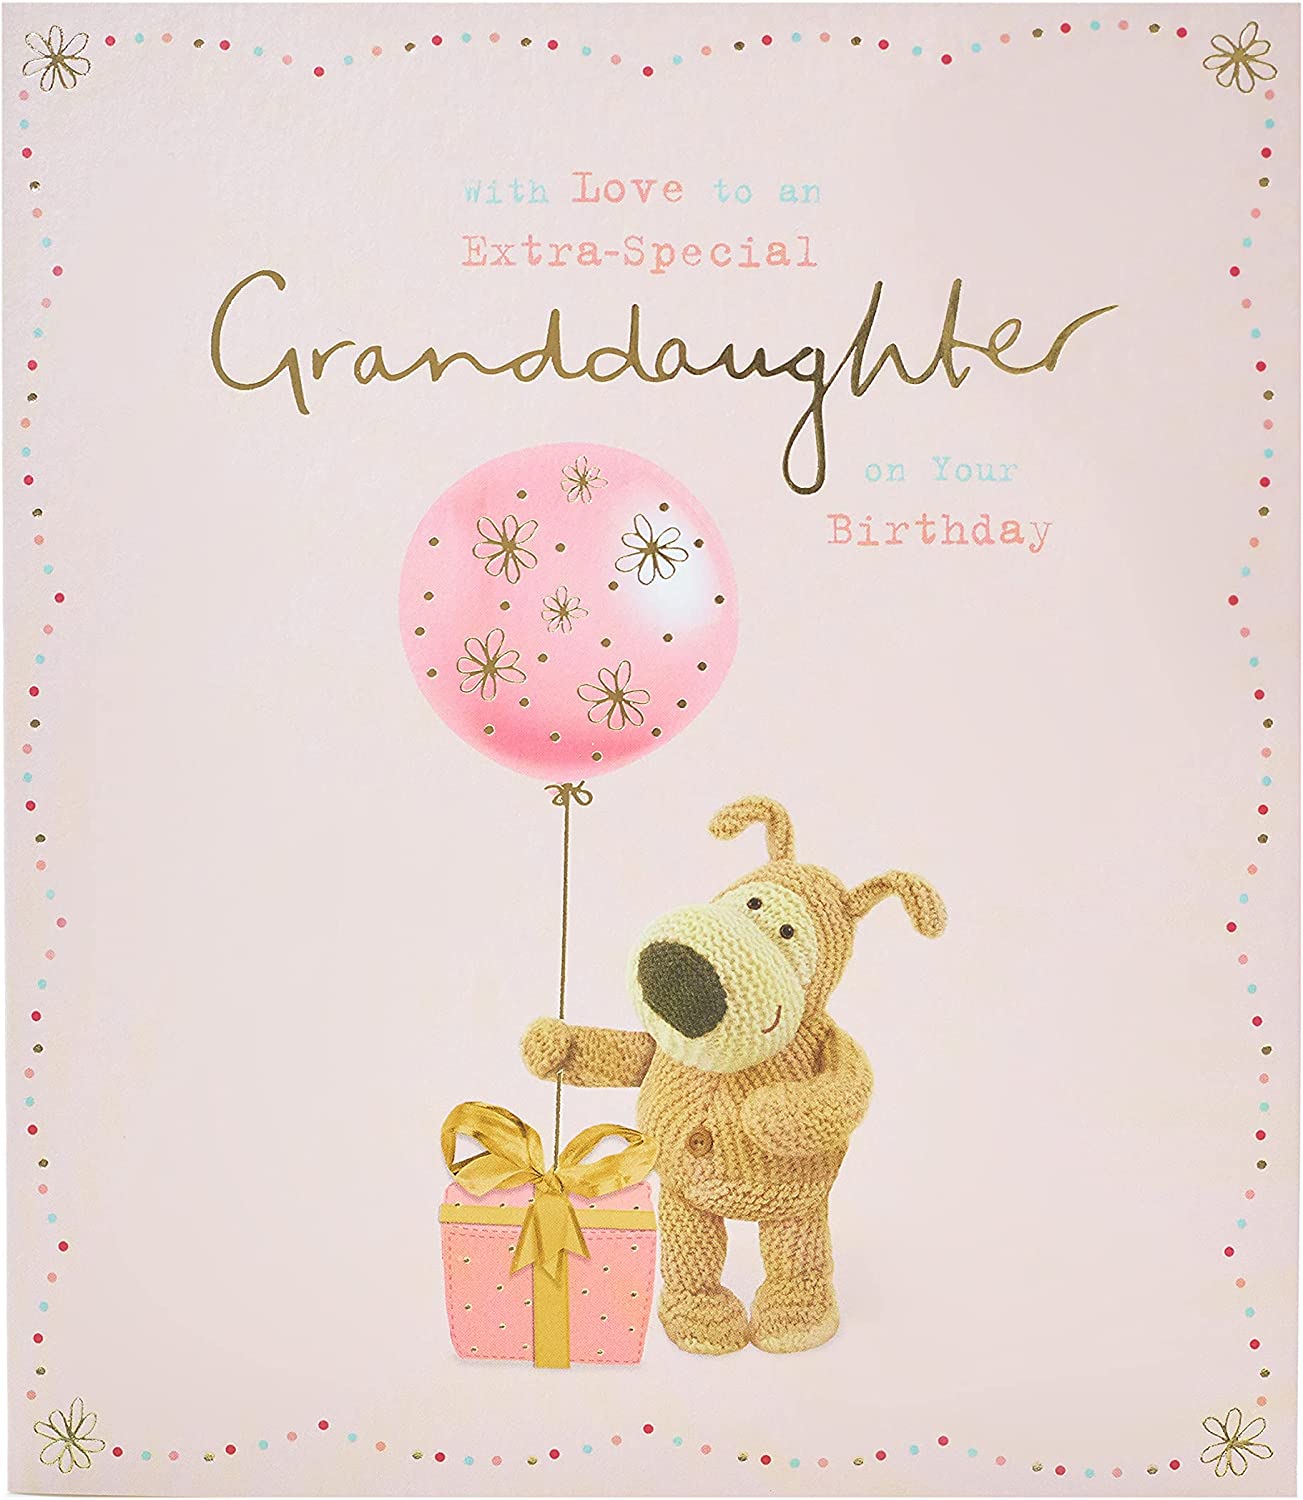 Granddaughter Birthday Card - Boofles With Present And Balloon